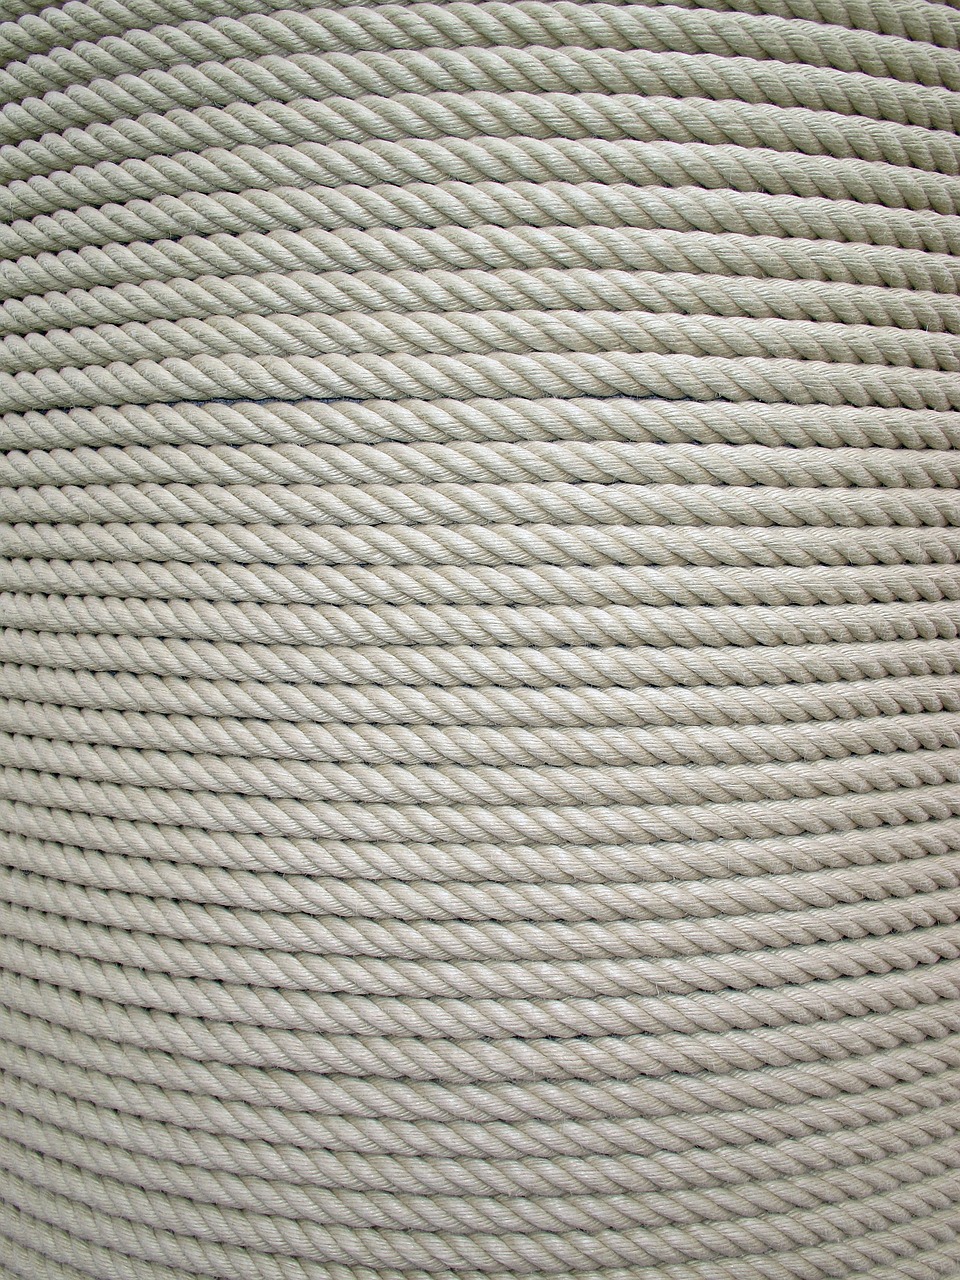 rope rolled up texture free photo